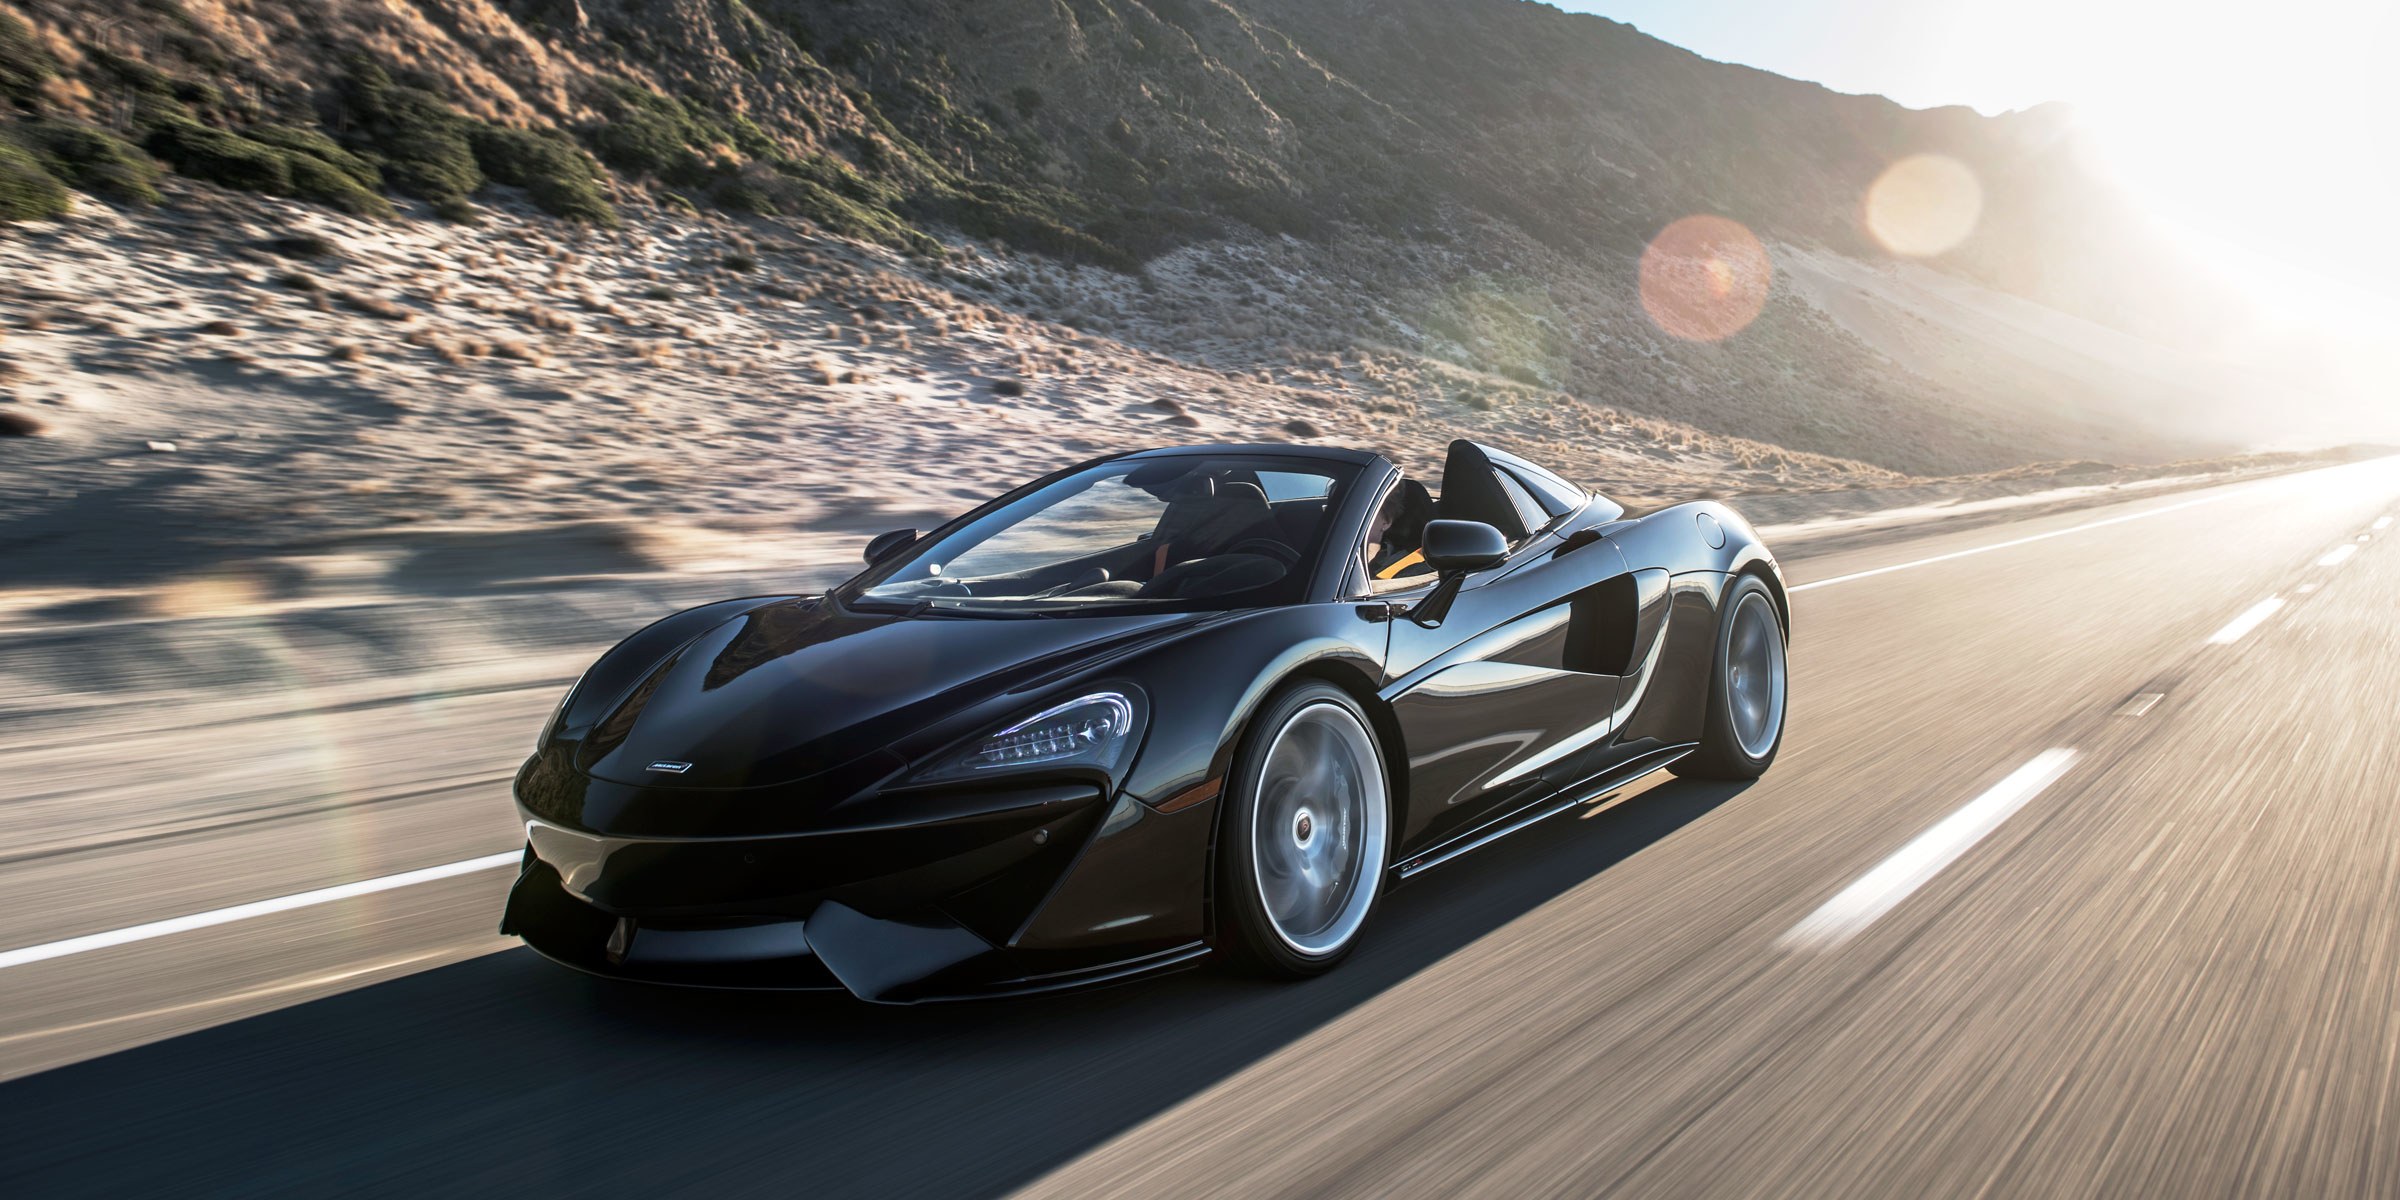 McLaren's New 570S Spider Supercar Adds Practicality to Luxury | WIRED